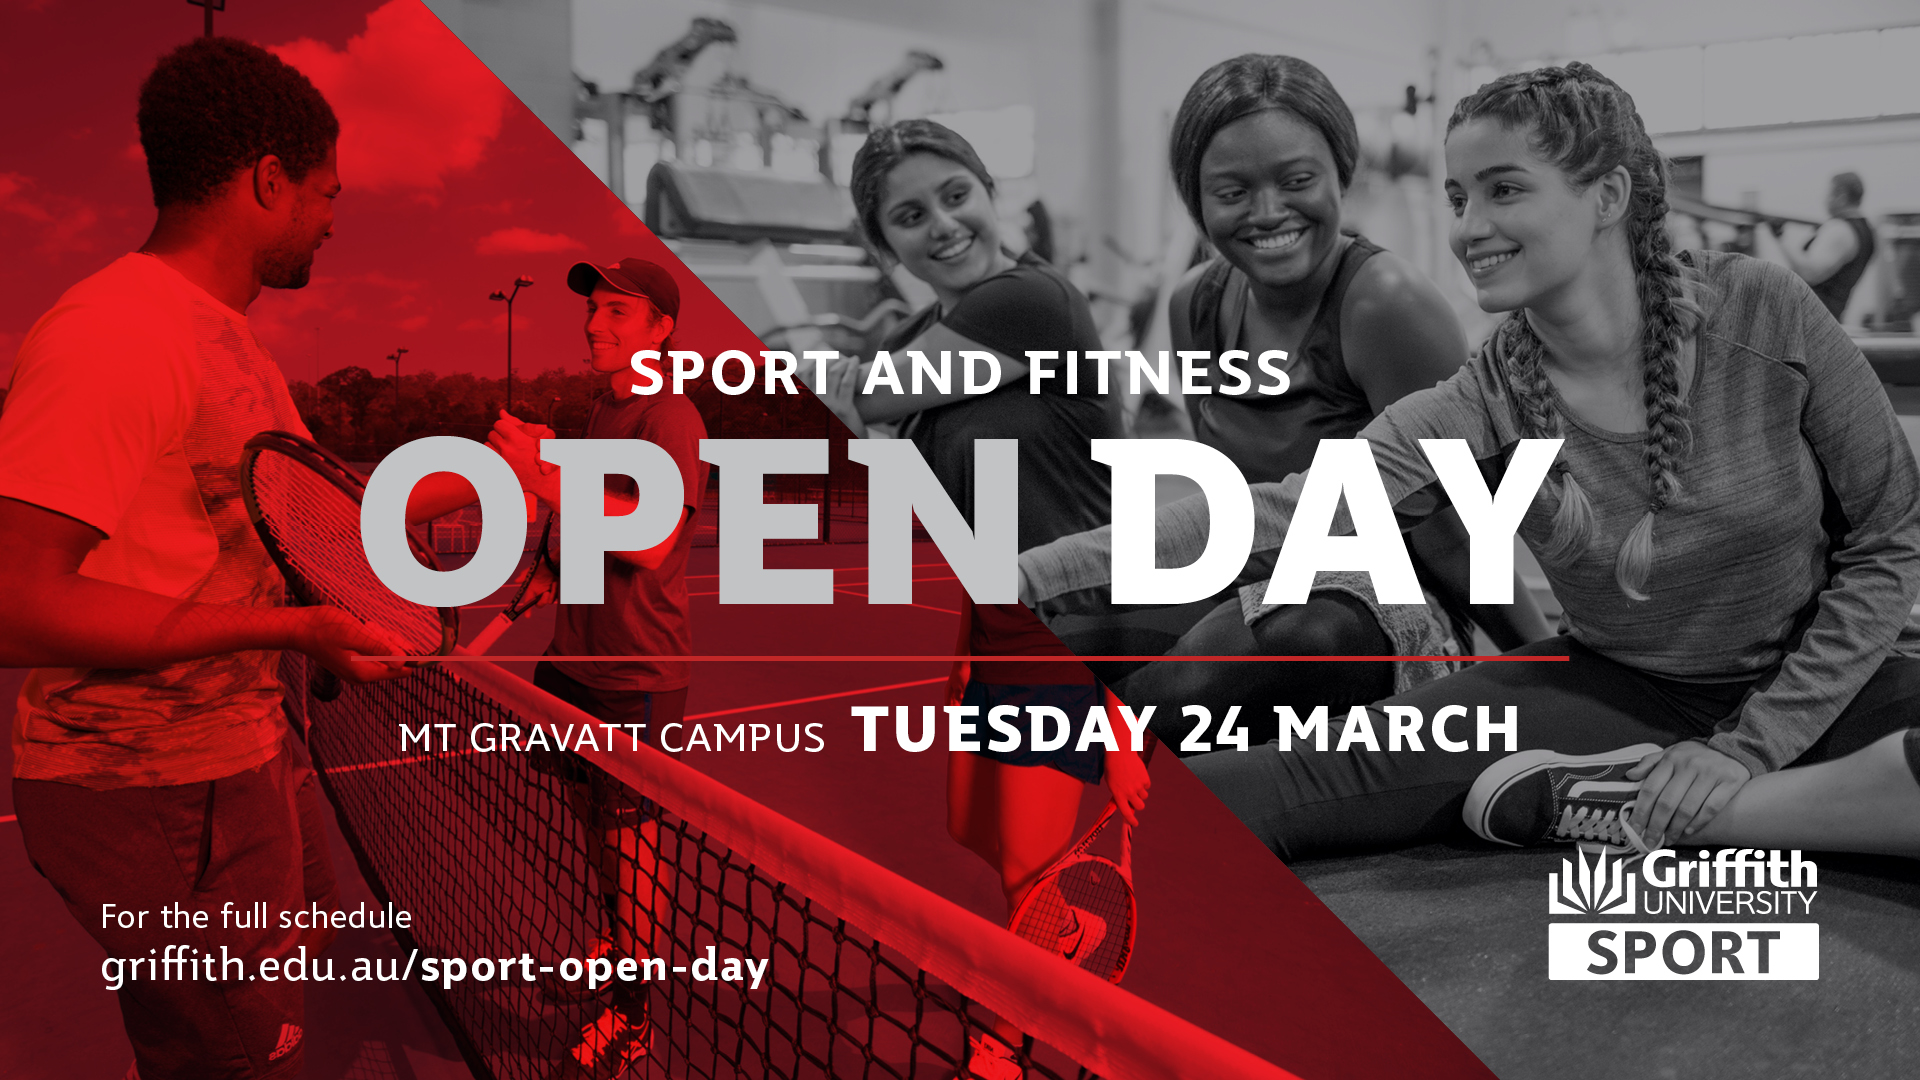 CANCELLED - Sport & Fitness Open Day MG